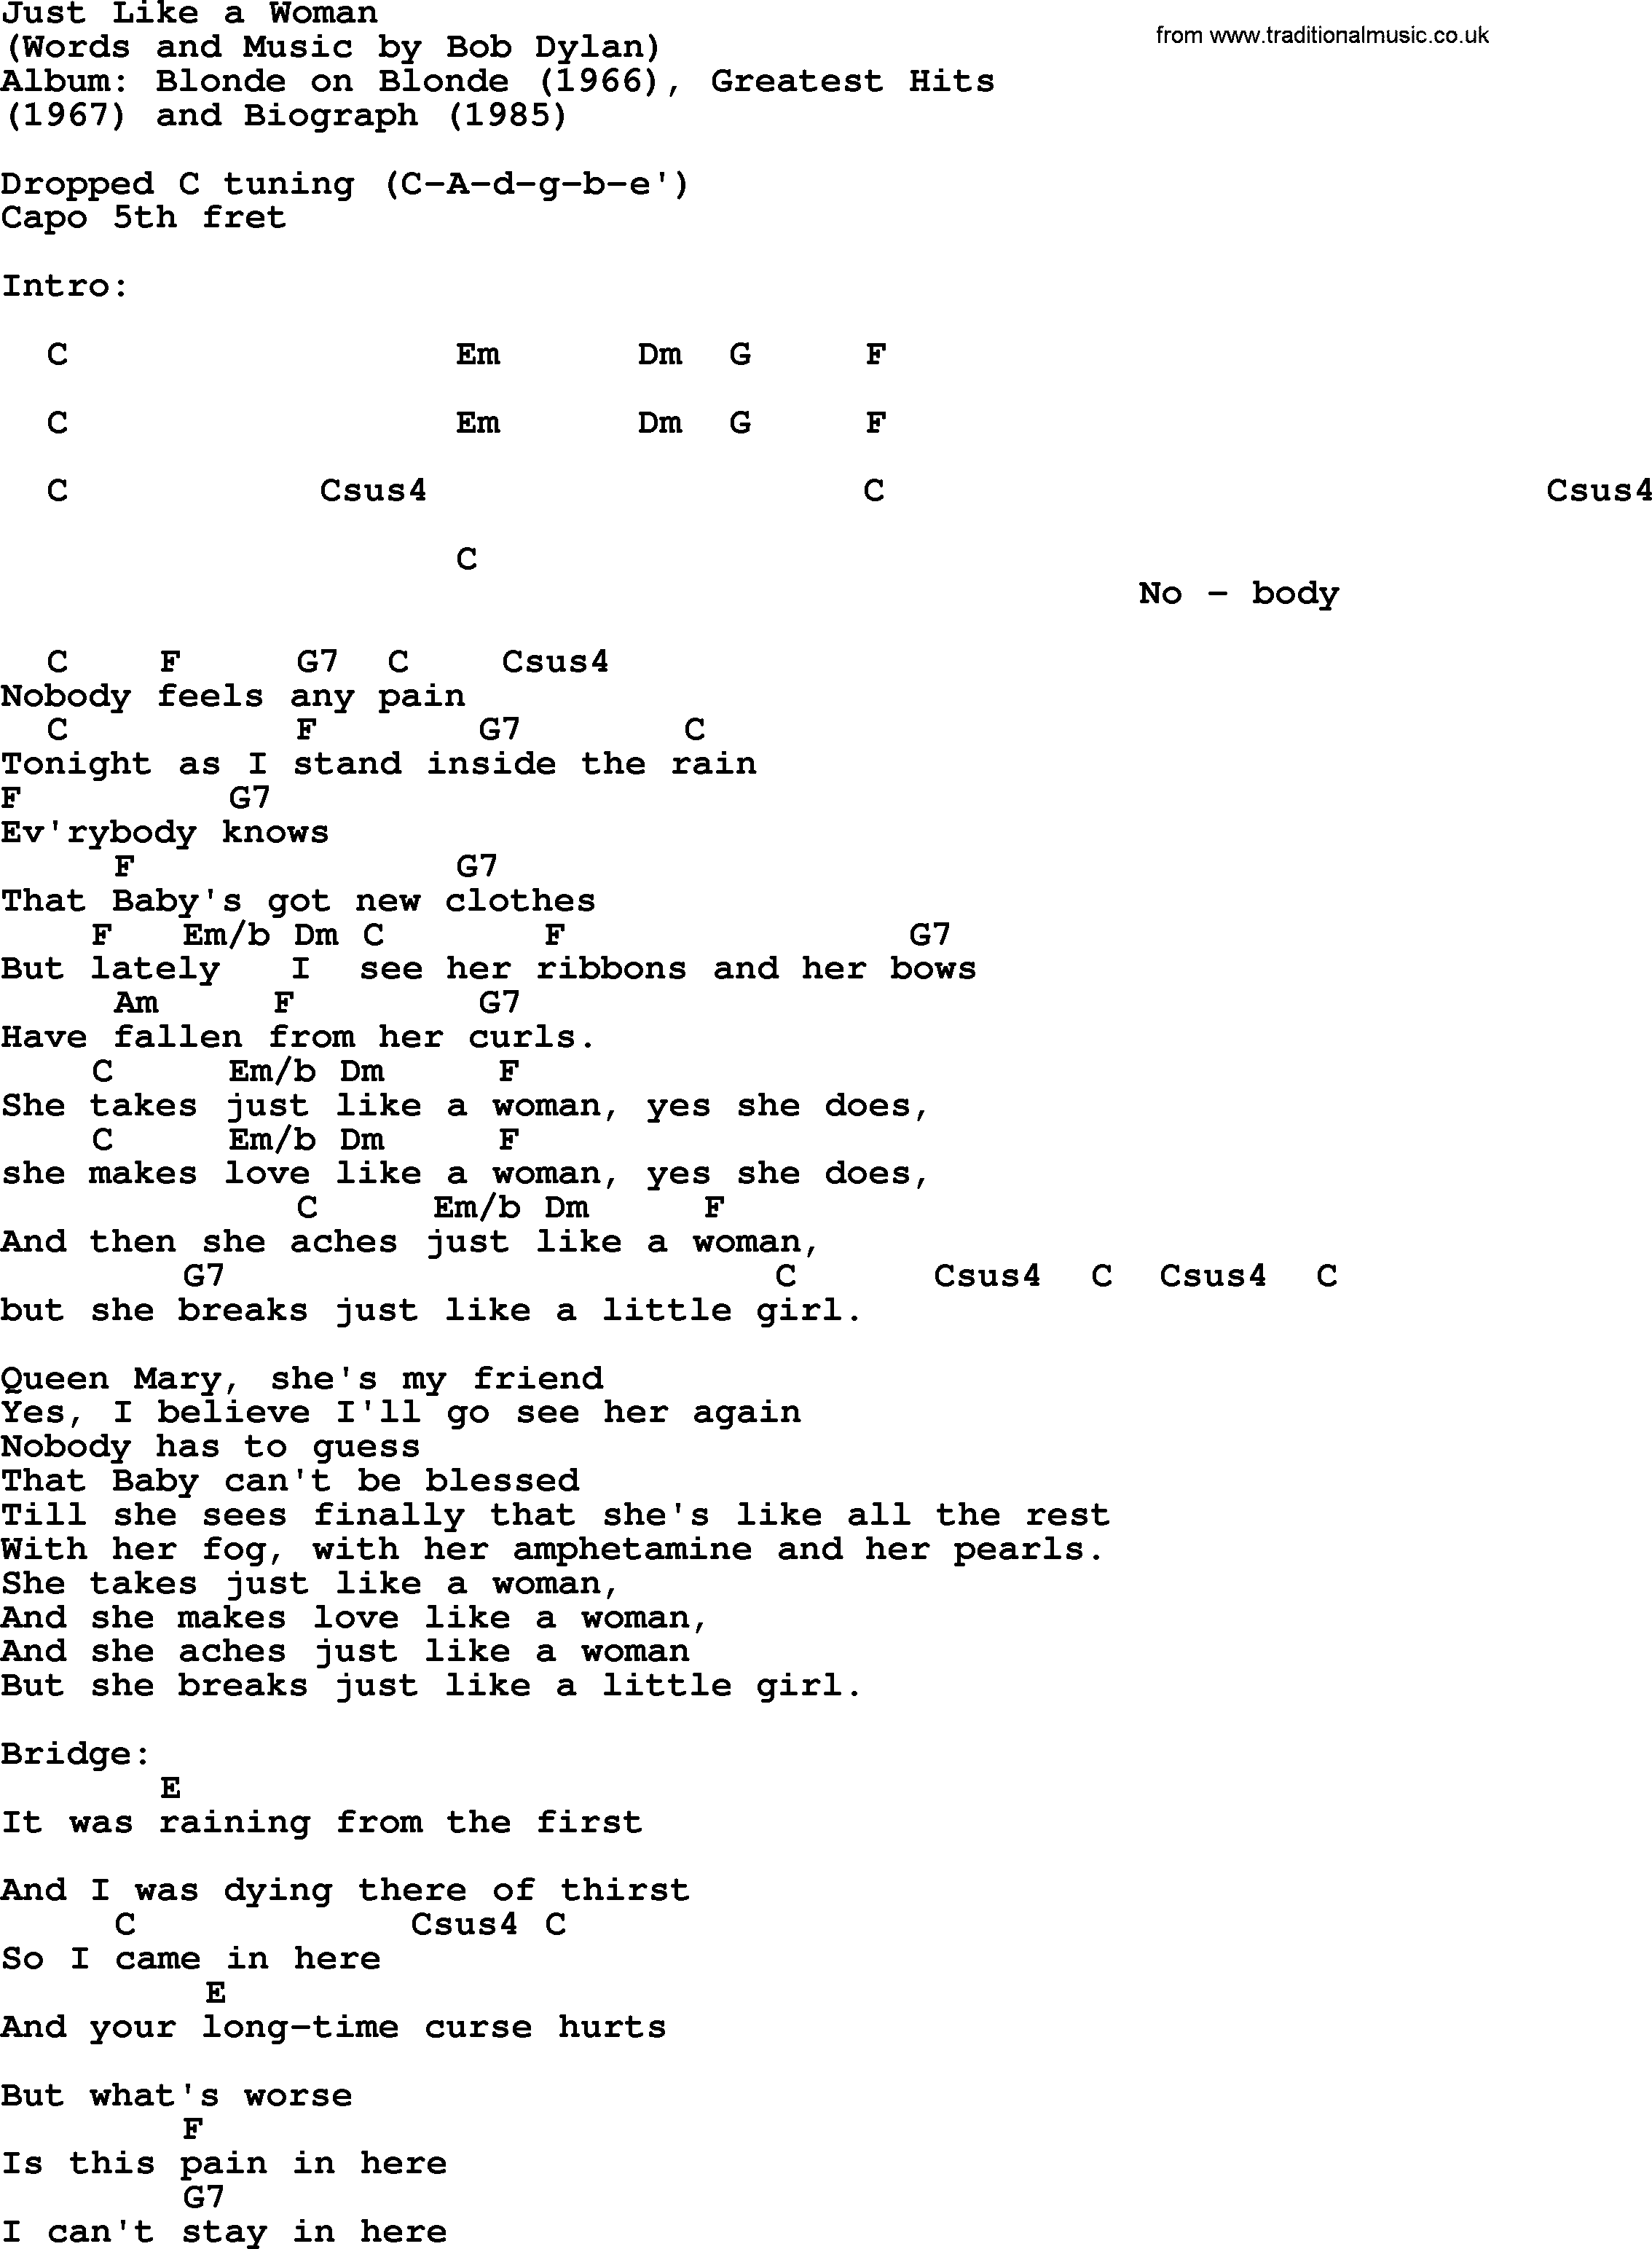 Bob Dylan song, lyrics with chords - Just Like a Woman